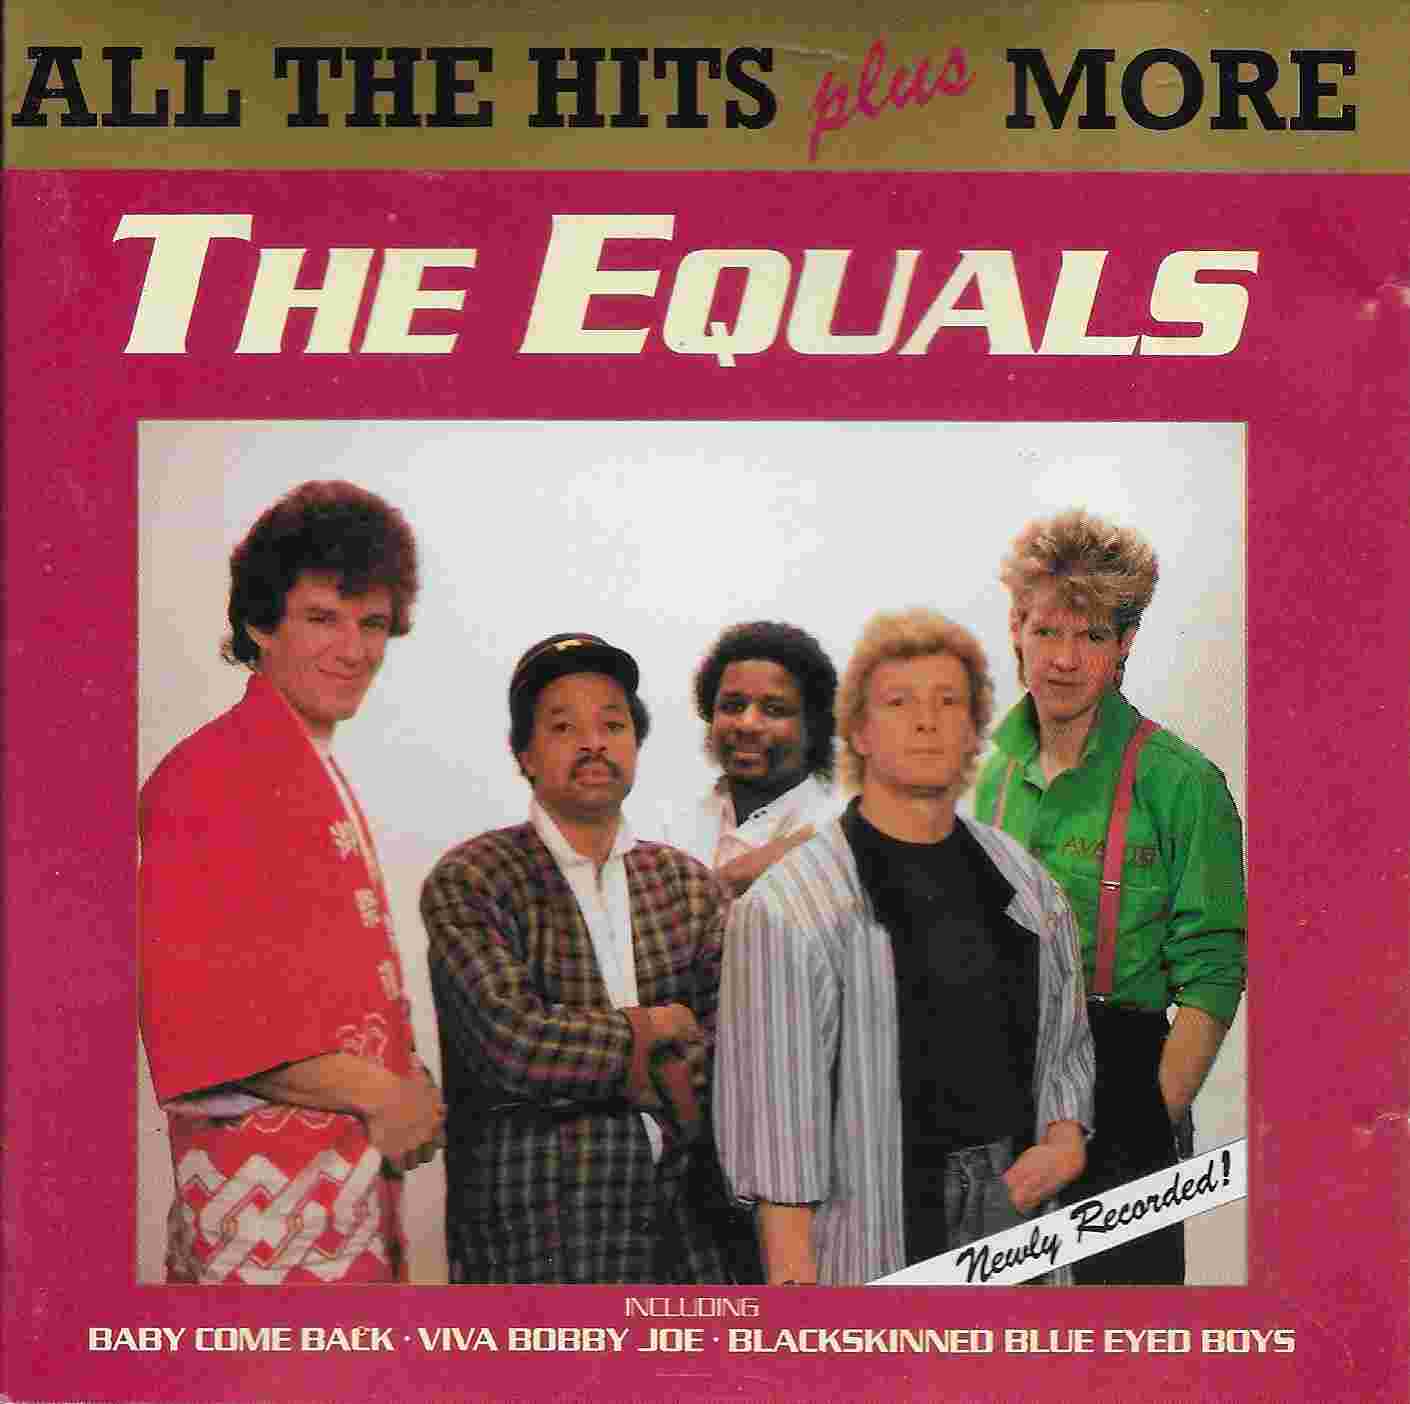 Picture of All the hits plus more by artist The Equals from the BBC cds - Records and Tapes library